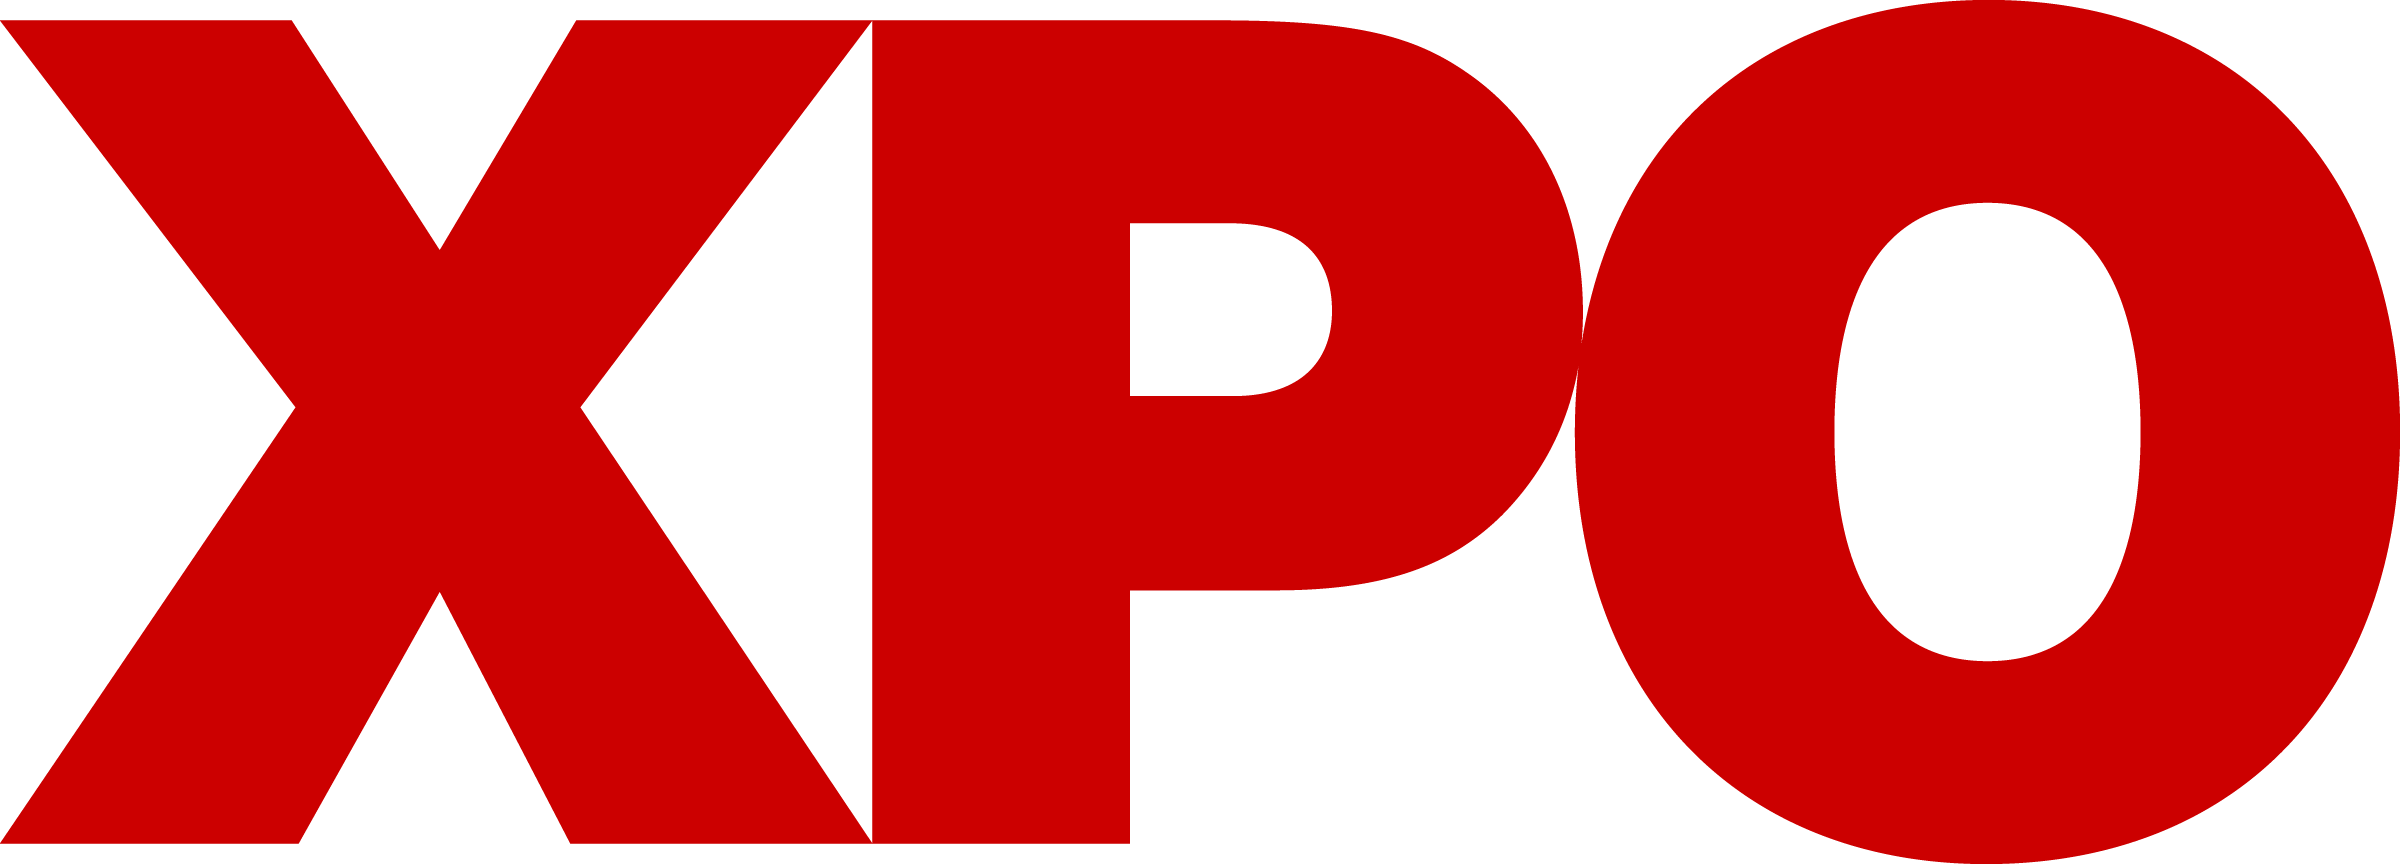 XPO Adds Capacity in Dallas with Garland Service Center Expansion 378aec62-5d02-4947-a49f-6b239fc7402d?size=1